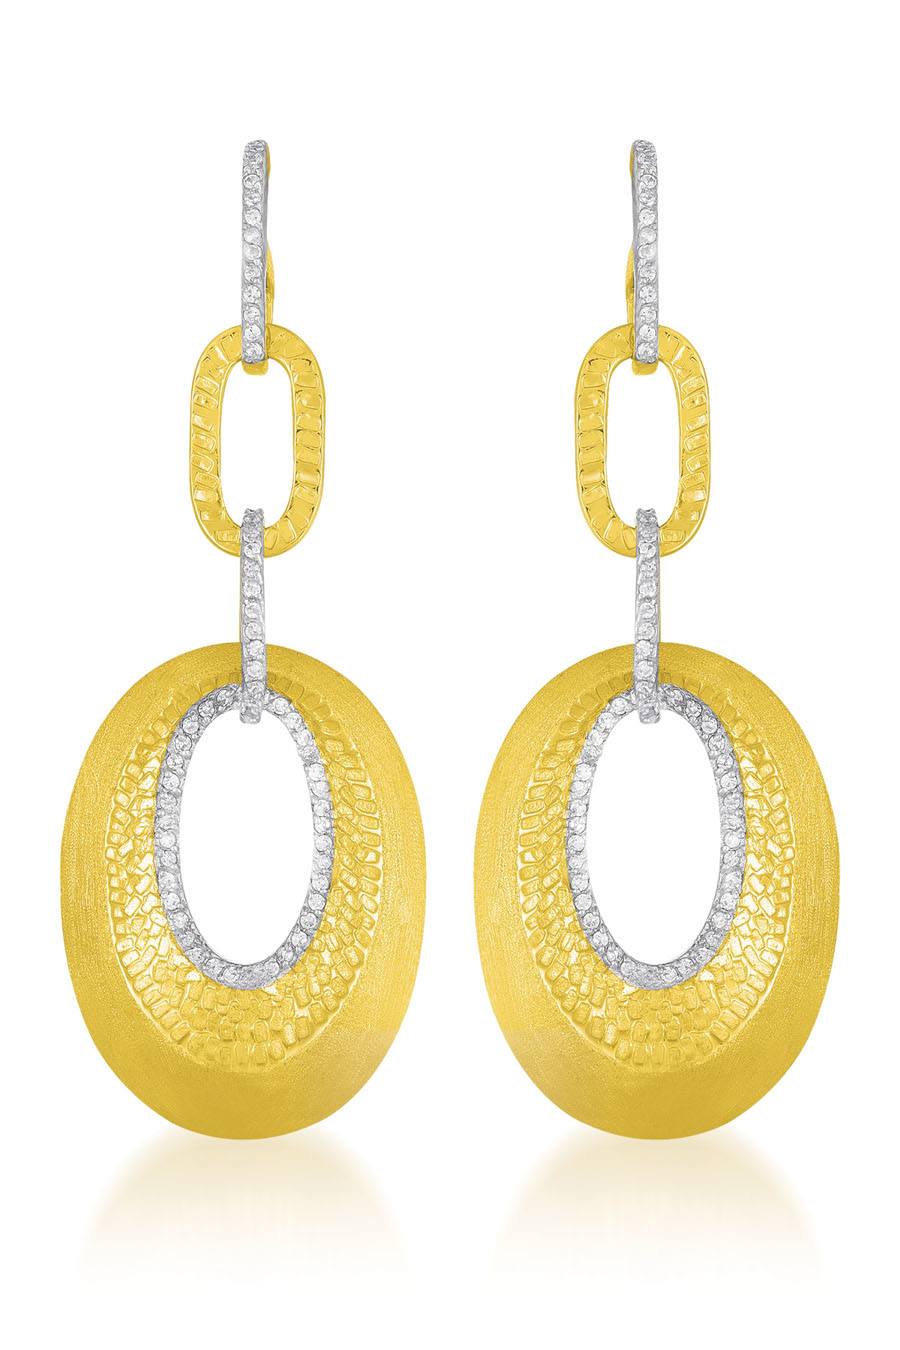 Cubic Zirconia (.925) Sterling Silver Gold Plated Oval Drop Earrings